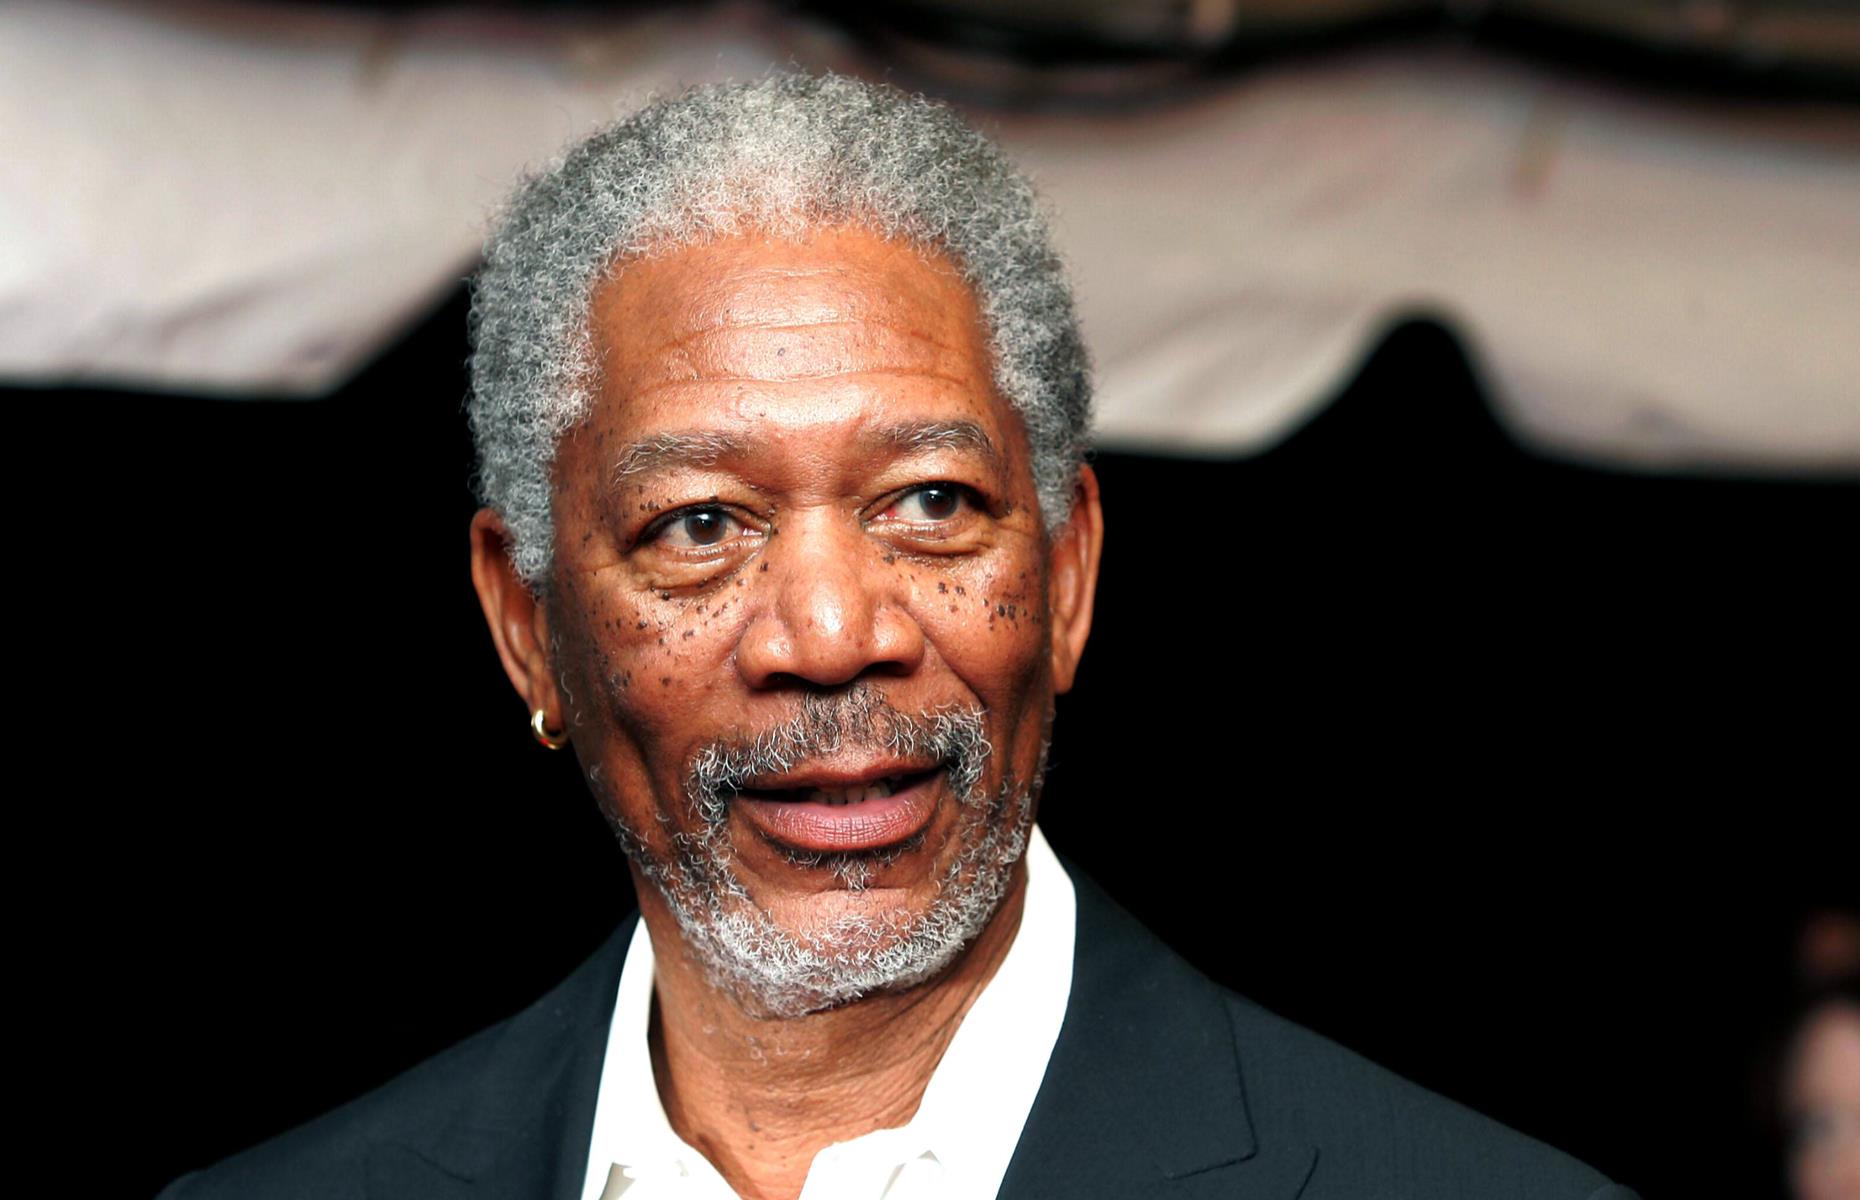 Morgan Freeman was in the airforce